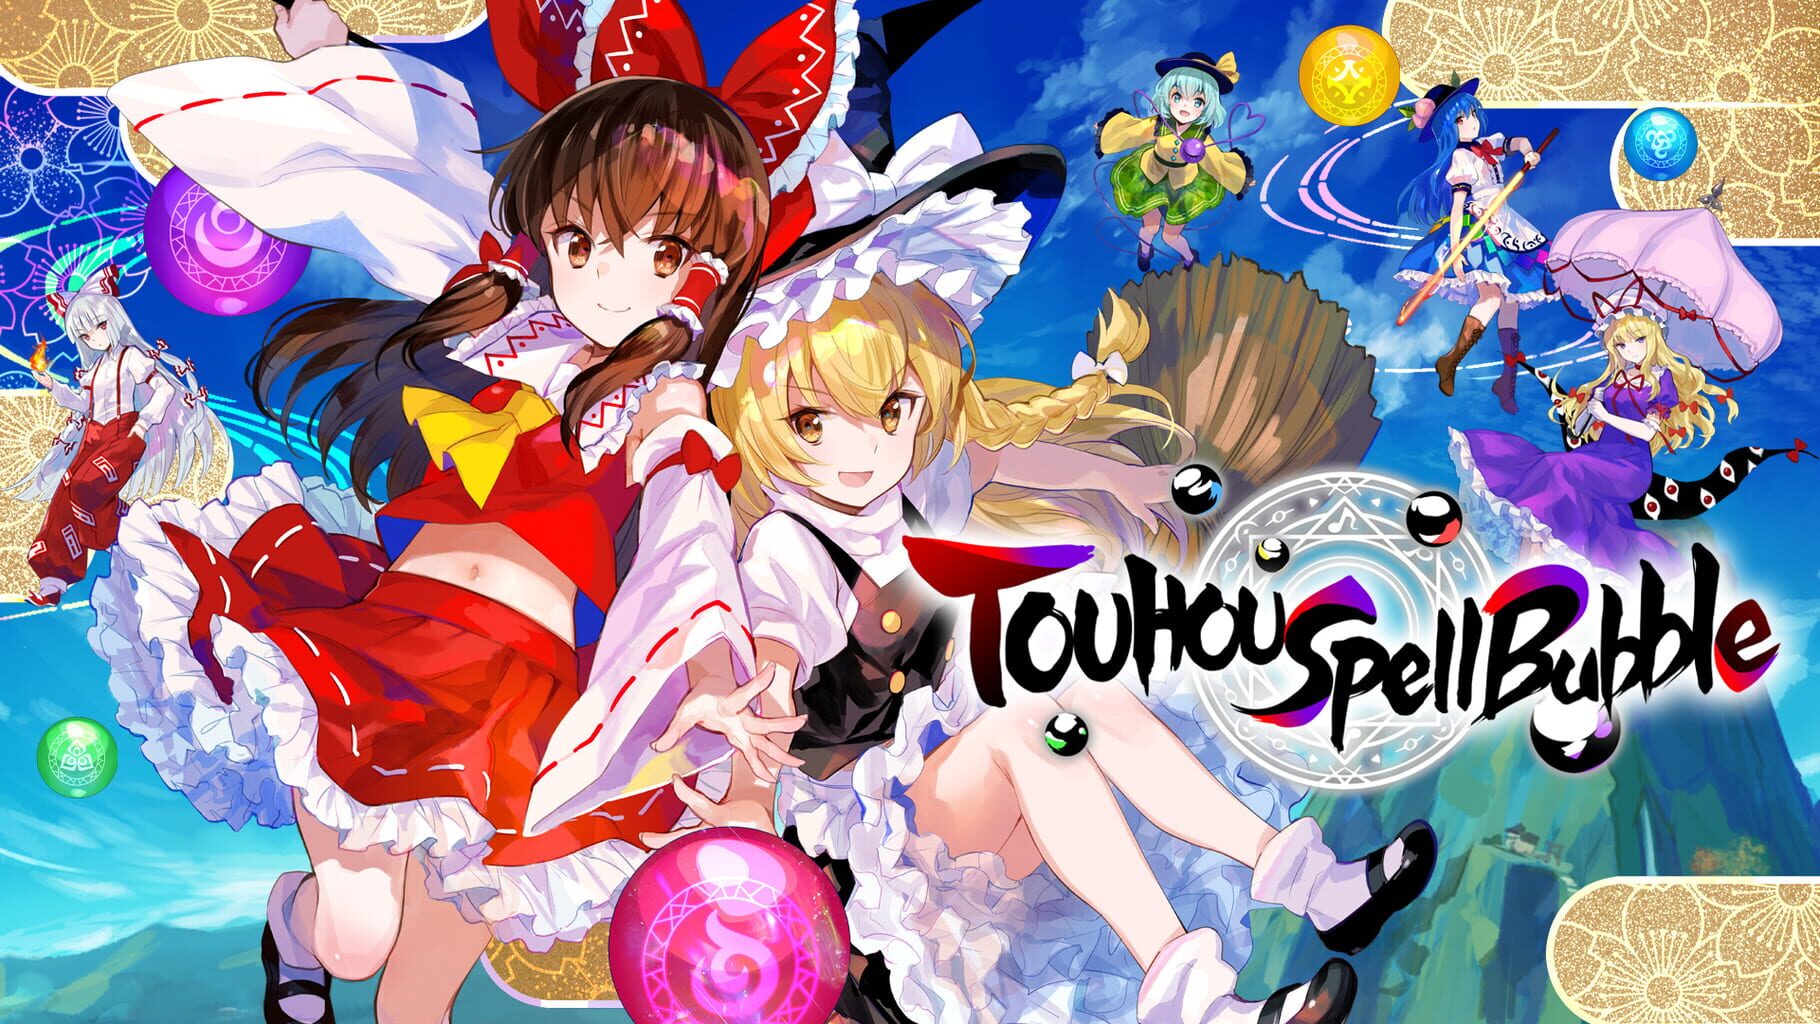 Touhou Spell Bubble artwork